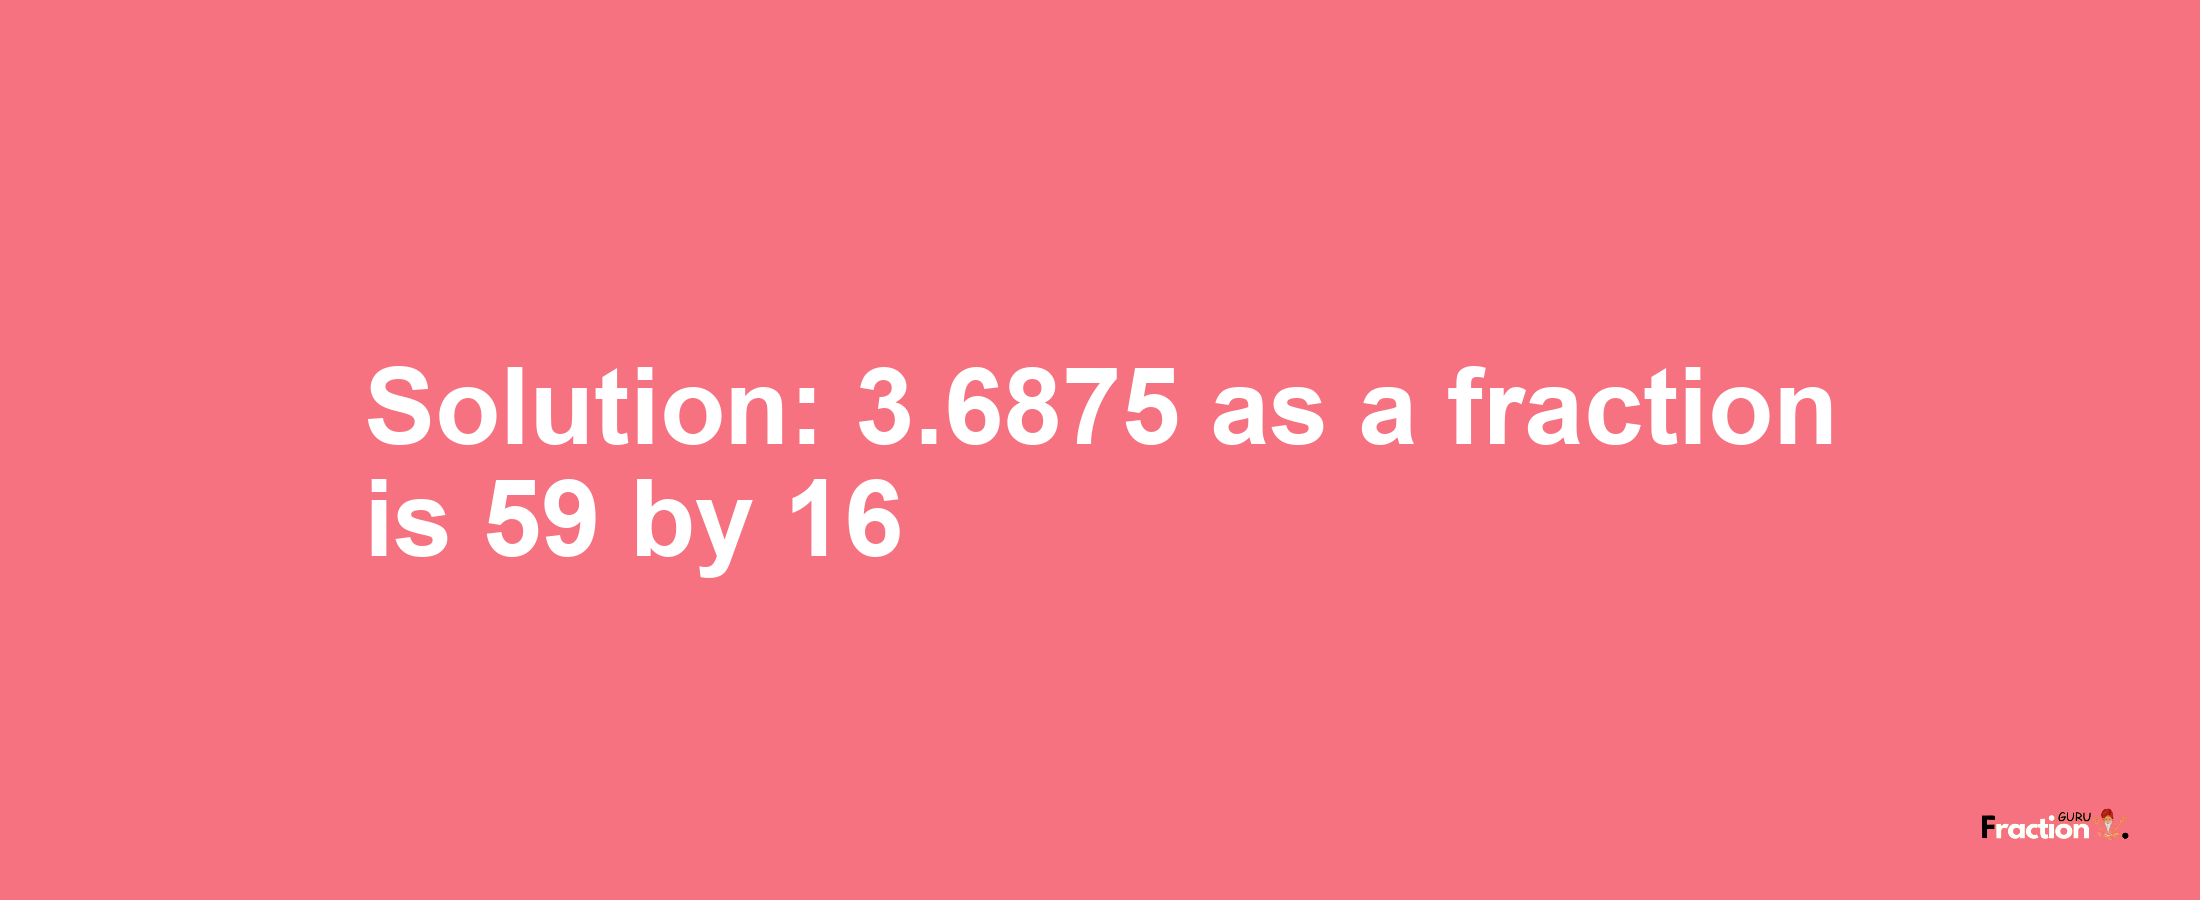 Solution:3.6875 as a fraction is 59/16